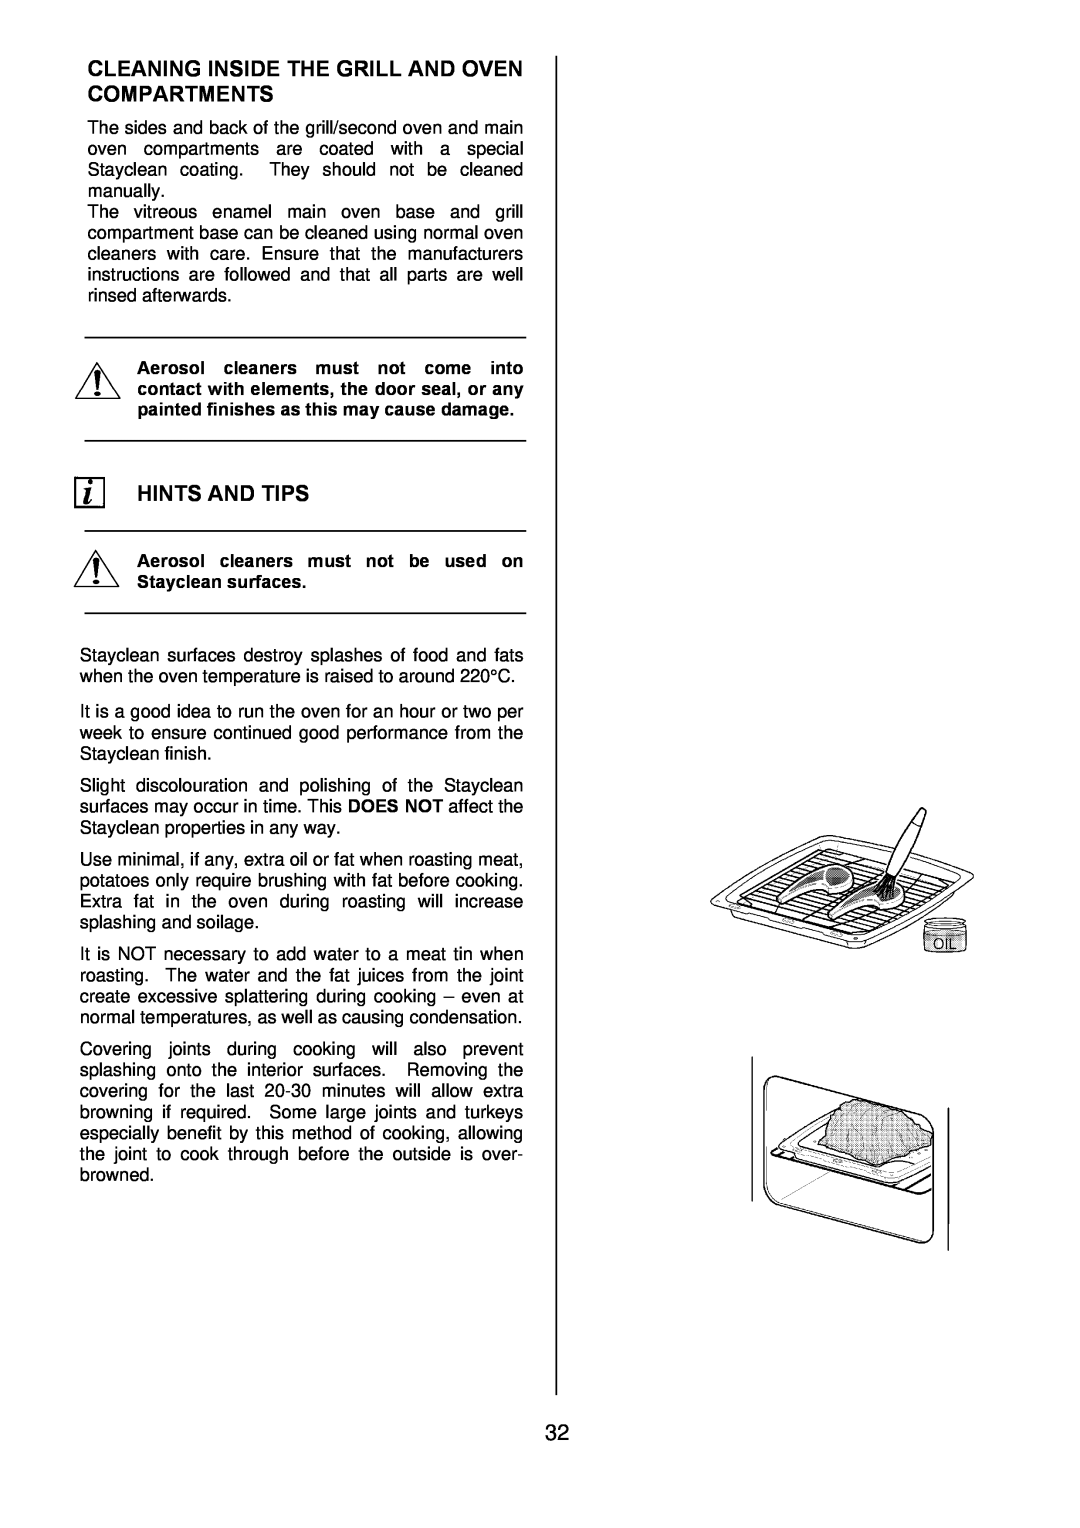 Electrolux D77000GF operating instructions Cleaning Inside The Grill And Oven Compartments, Hints And Tips 